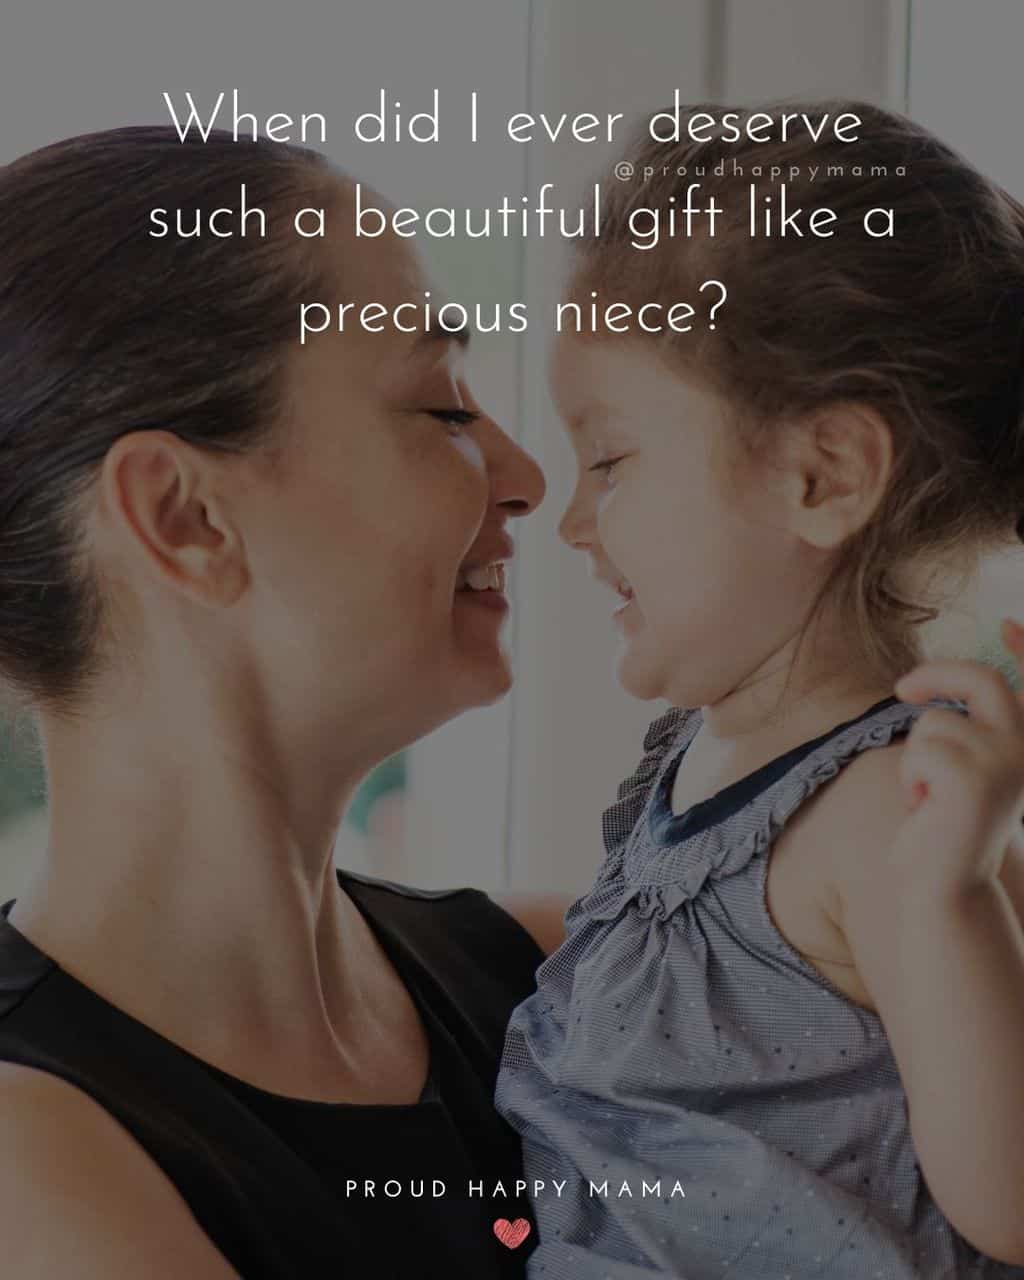 Niece Quotes - When did I ever deserve such a beautiful gift like a precious niece